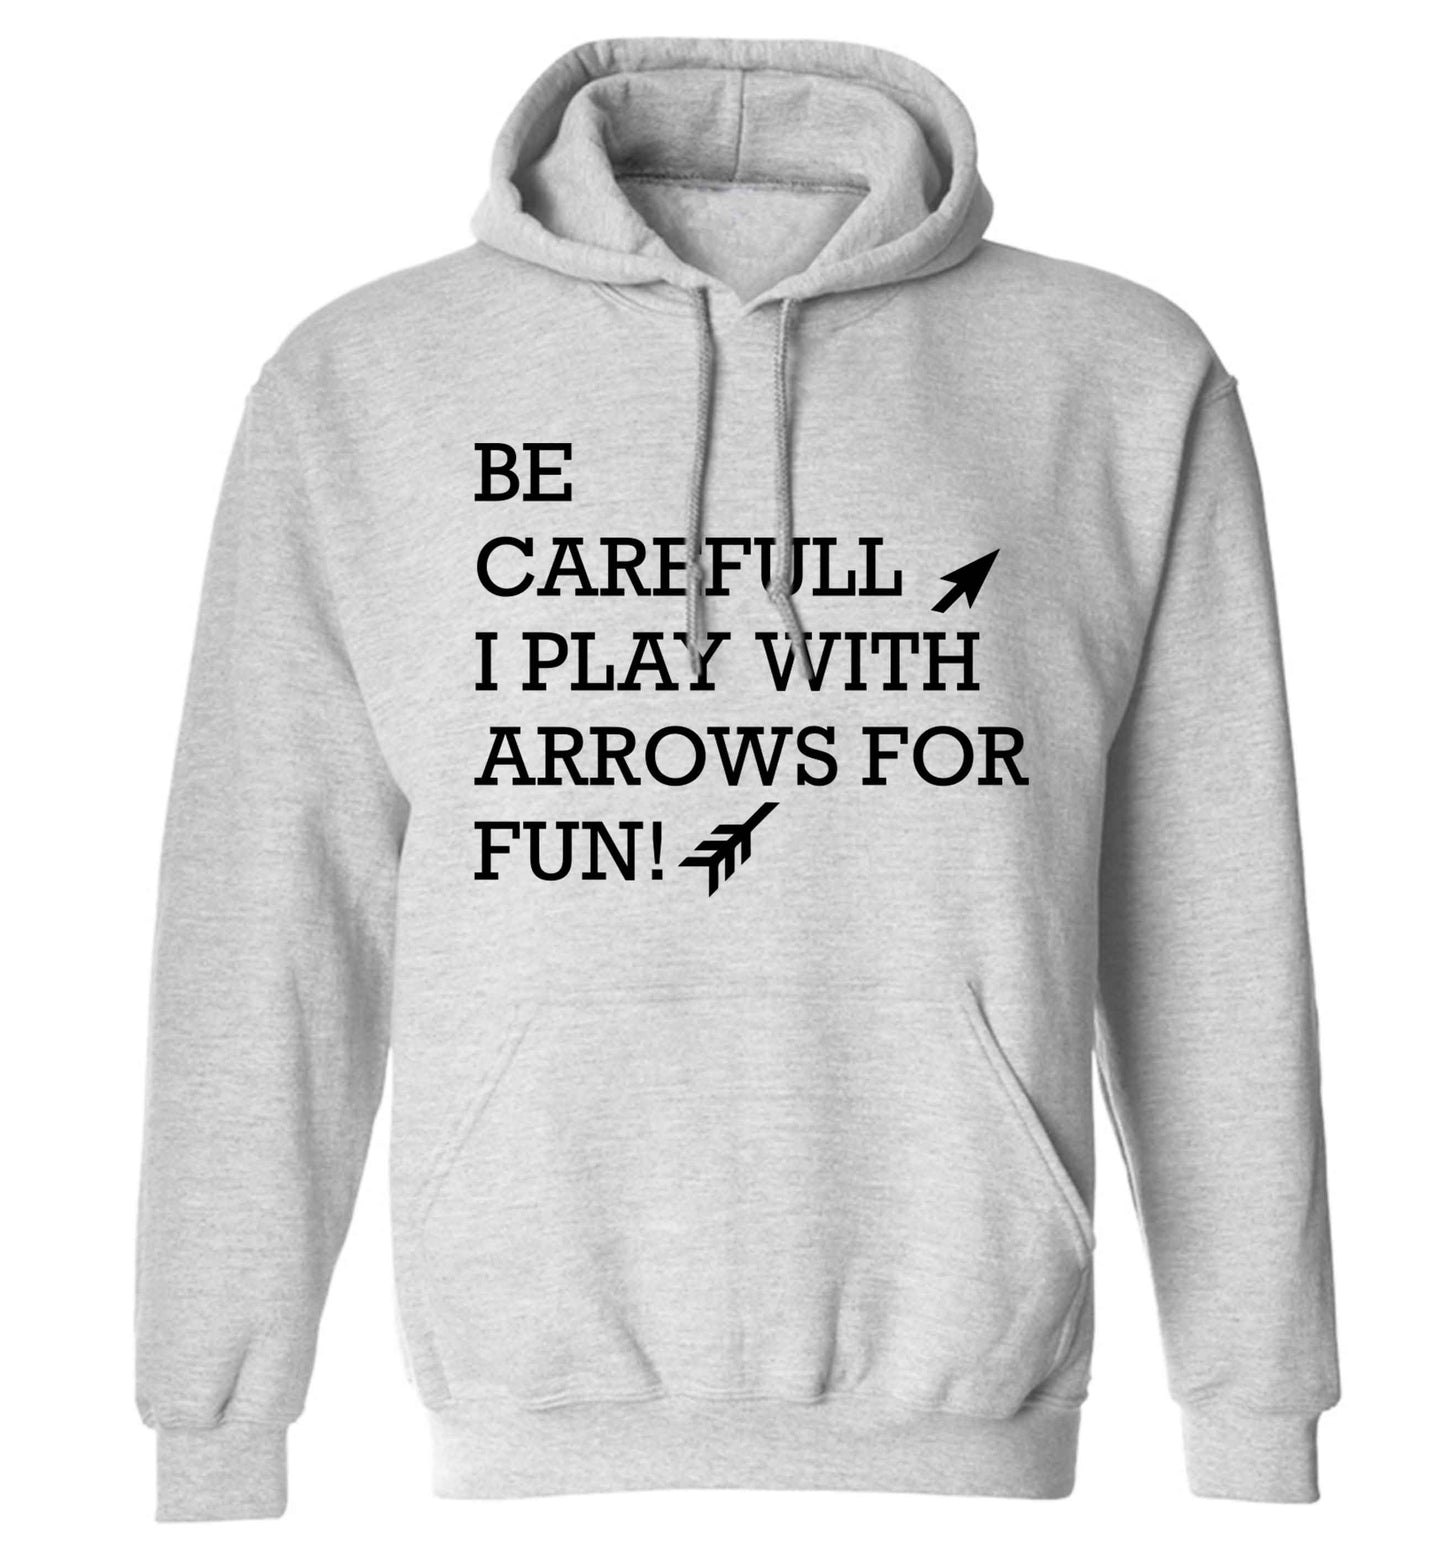 Be carefull I play with arrows for fun adults unisex grey hoodie 2XL